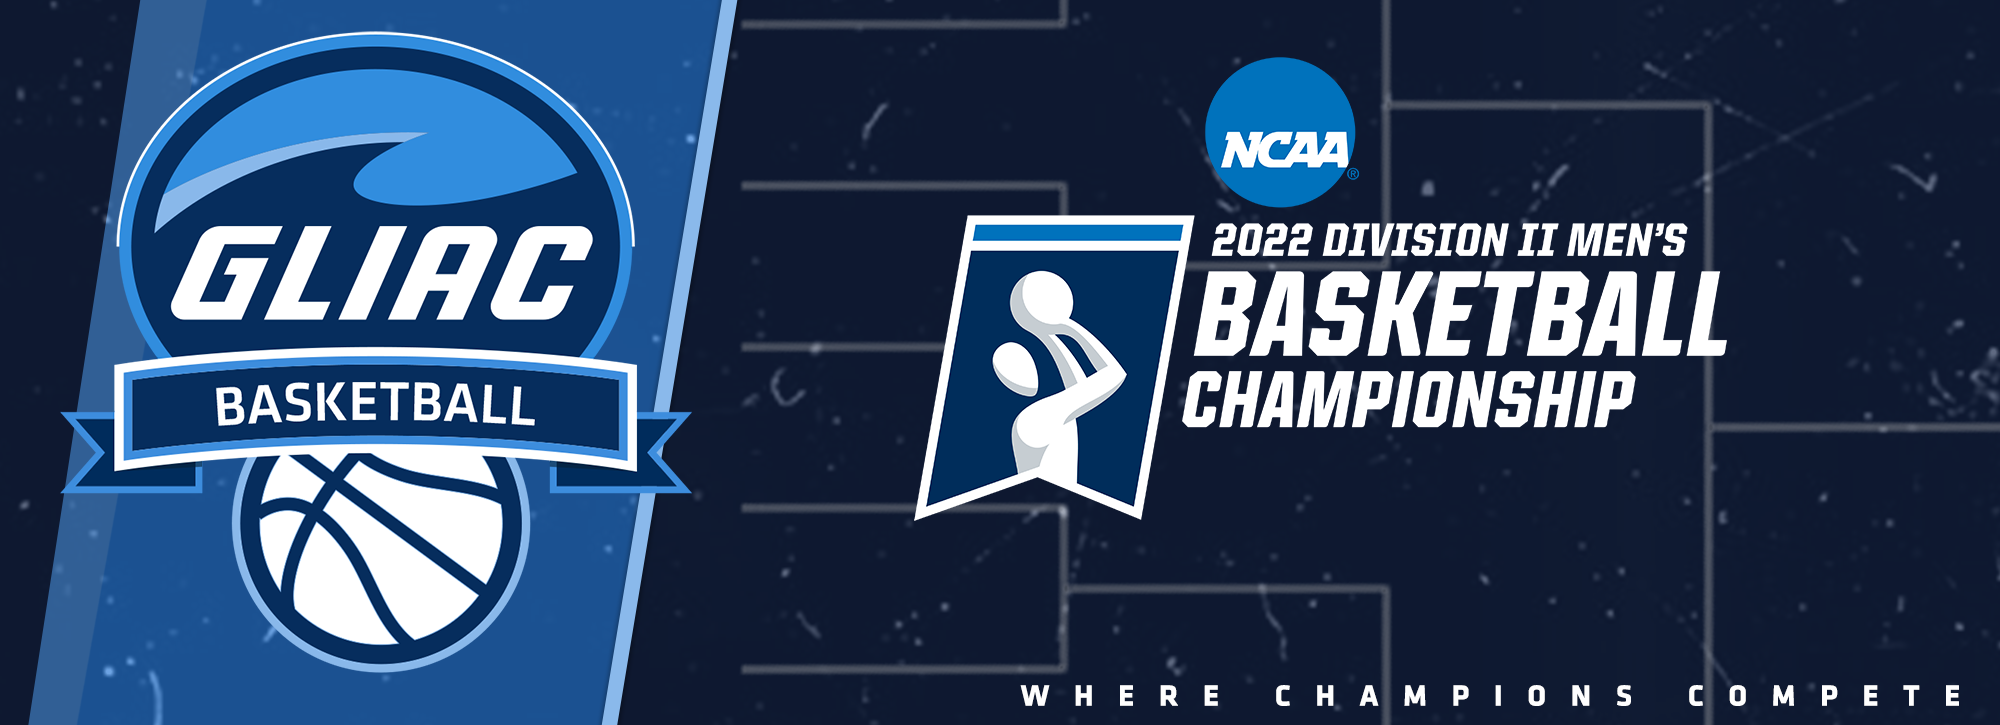 Ferris State and Davenport are headed to the 2022 NCAA Division II Men's Basketball Championship